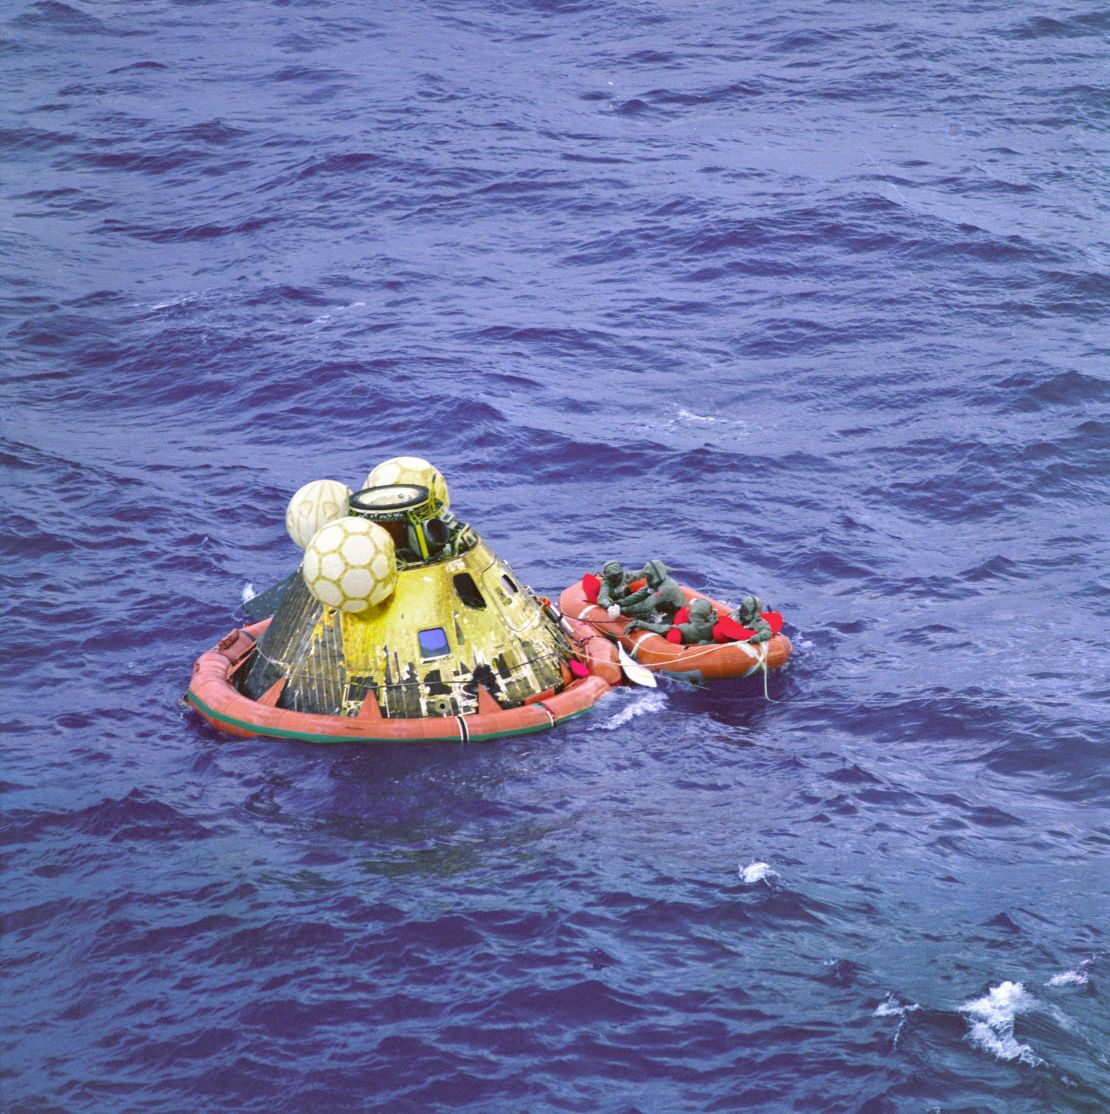 Apollo 11 crew members Neil Armstrong, Michael Collins and Buzz Aldrin wait to be picked by a helicopter on July 24, 1969. The fourth man in the raft is a U.S. Navy swimmer.